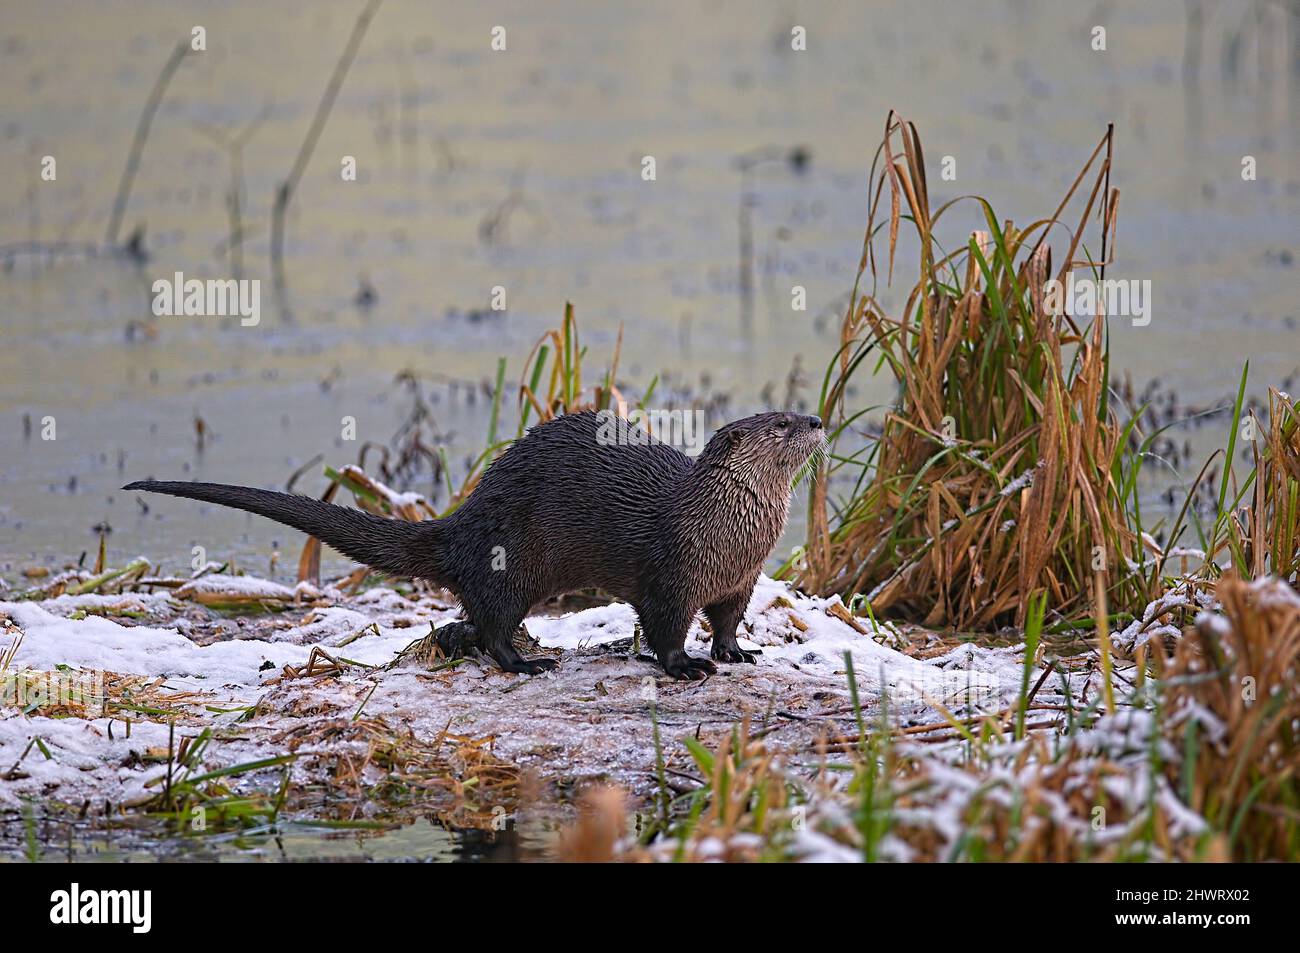 North American River Otter in the snow along the riverbank (Lontra canadensis). Stock Photo